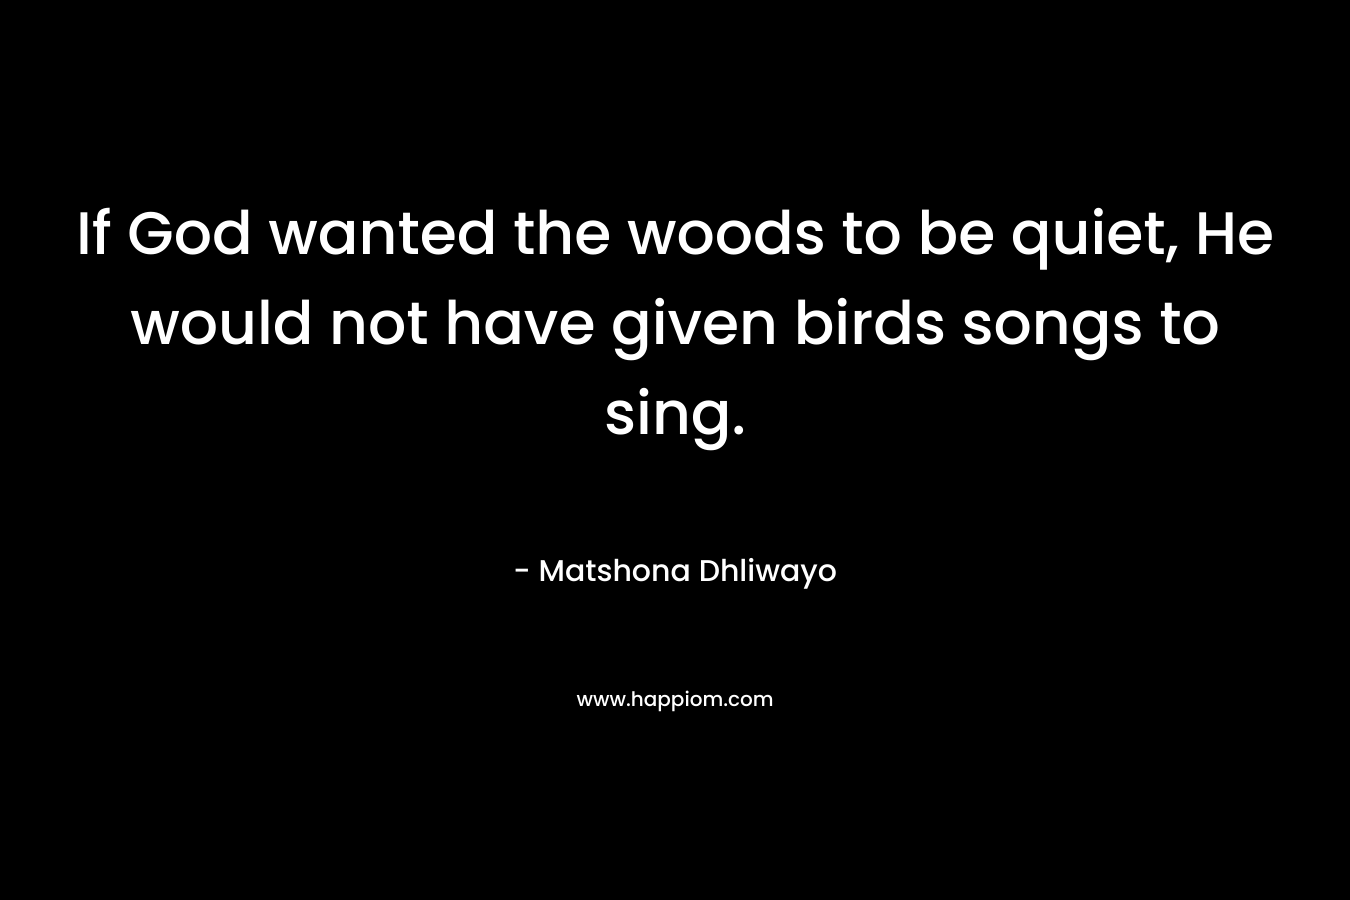 If God wanted the woods to be quiet, He would not have given birds songs to sing.